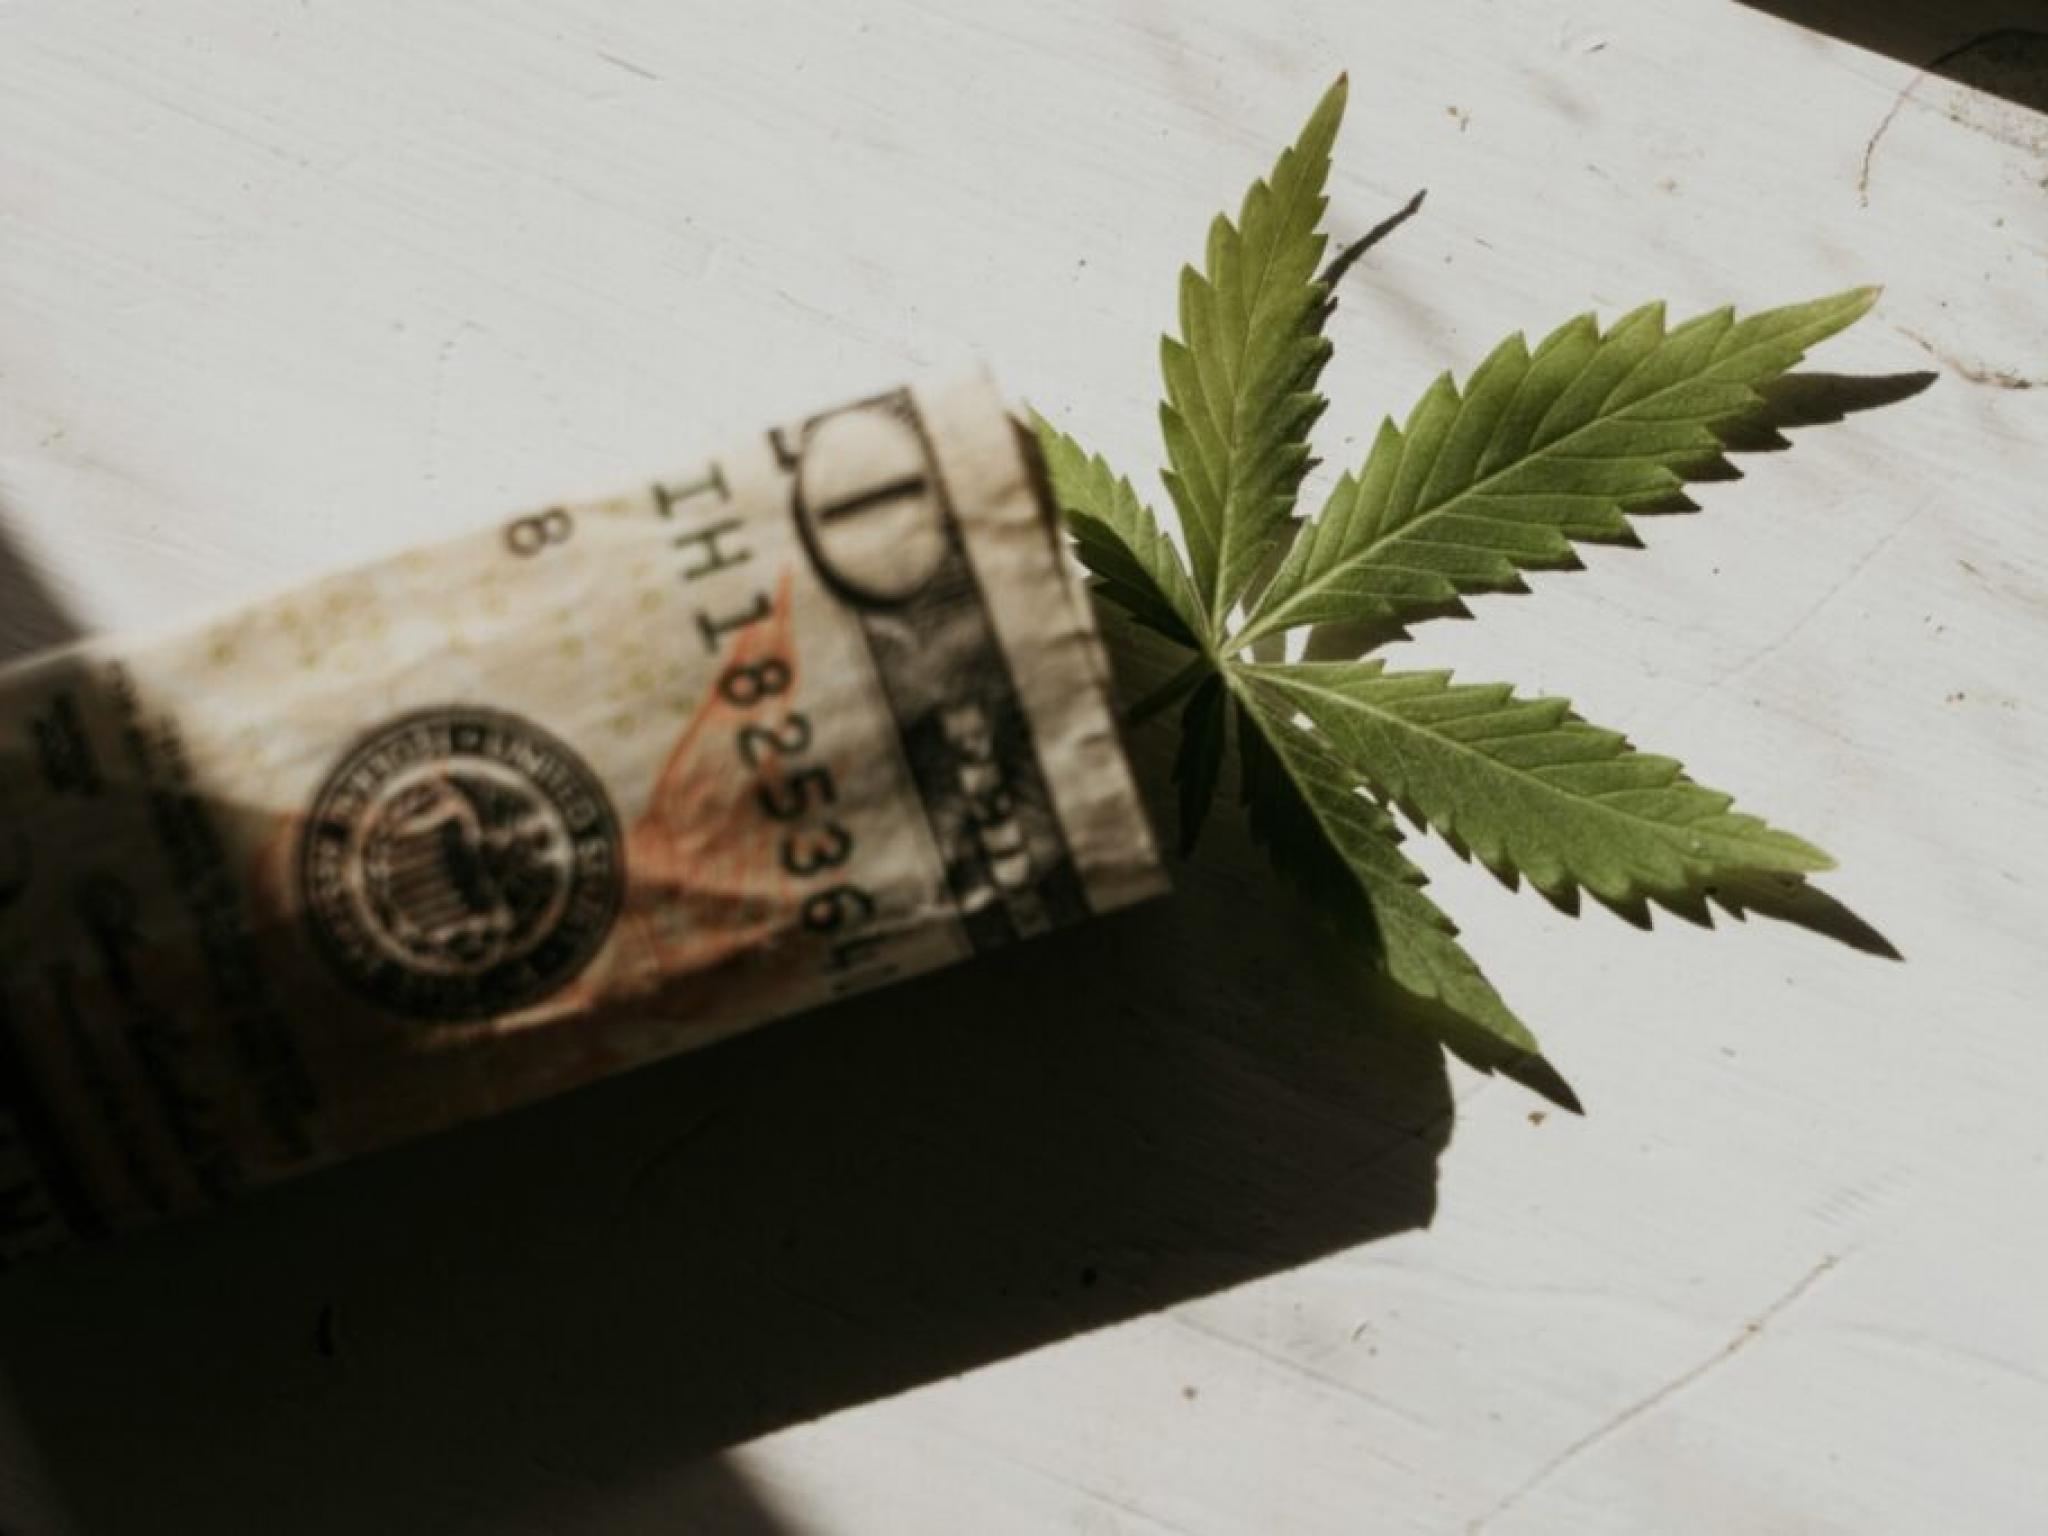  cannabis-co-c21-investments-reports-fifth-consecutive-year-of-positive-free-cash-flow-following-35m-deep-roots-harvest-acquisition 